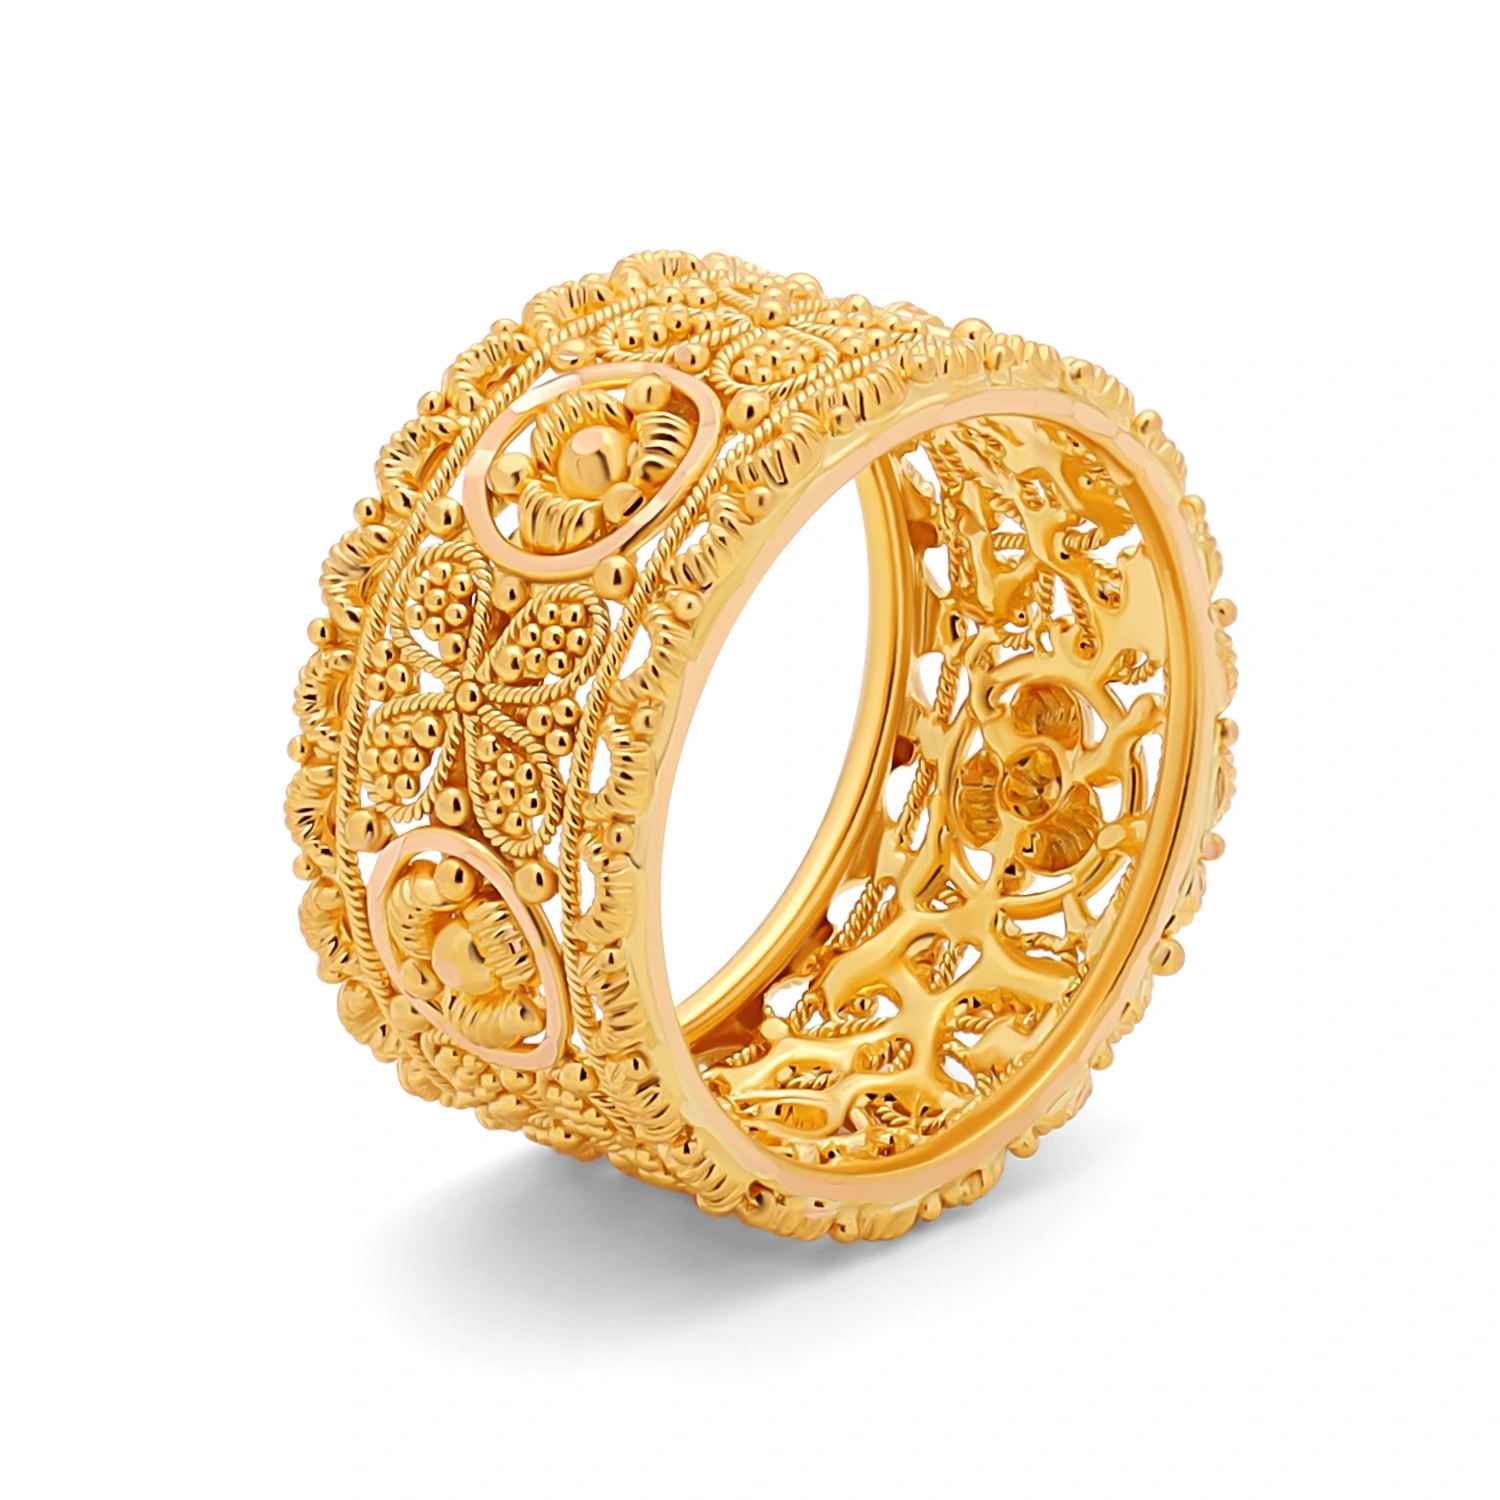 Welsh Gold and Fairmined Gold Celtic Rings - Welsh Gold